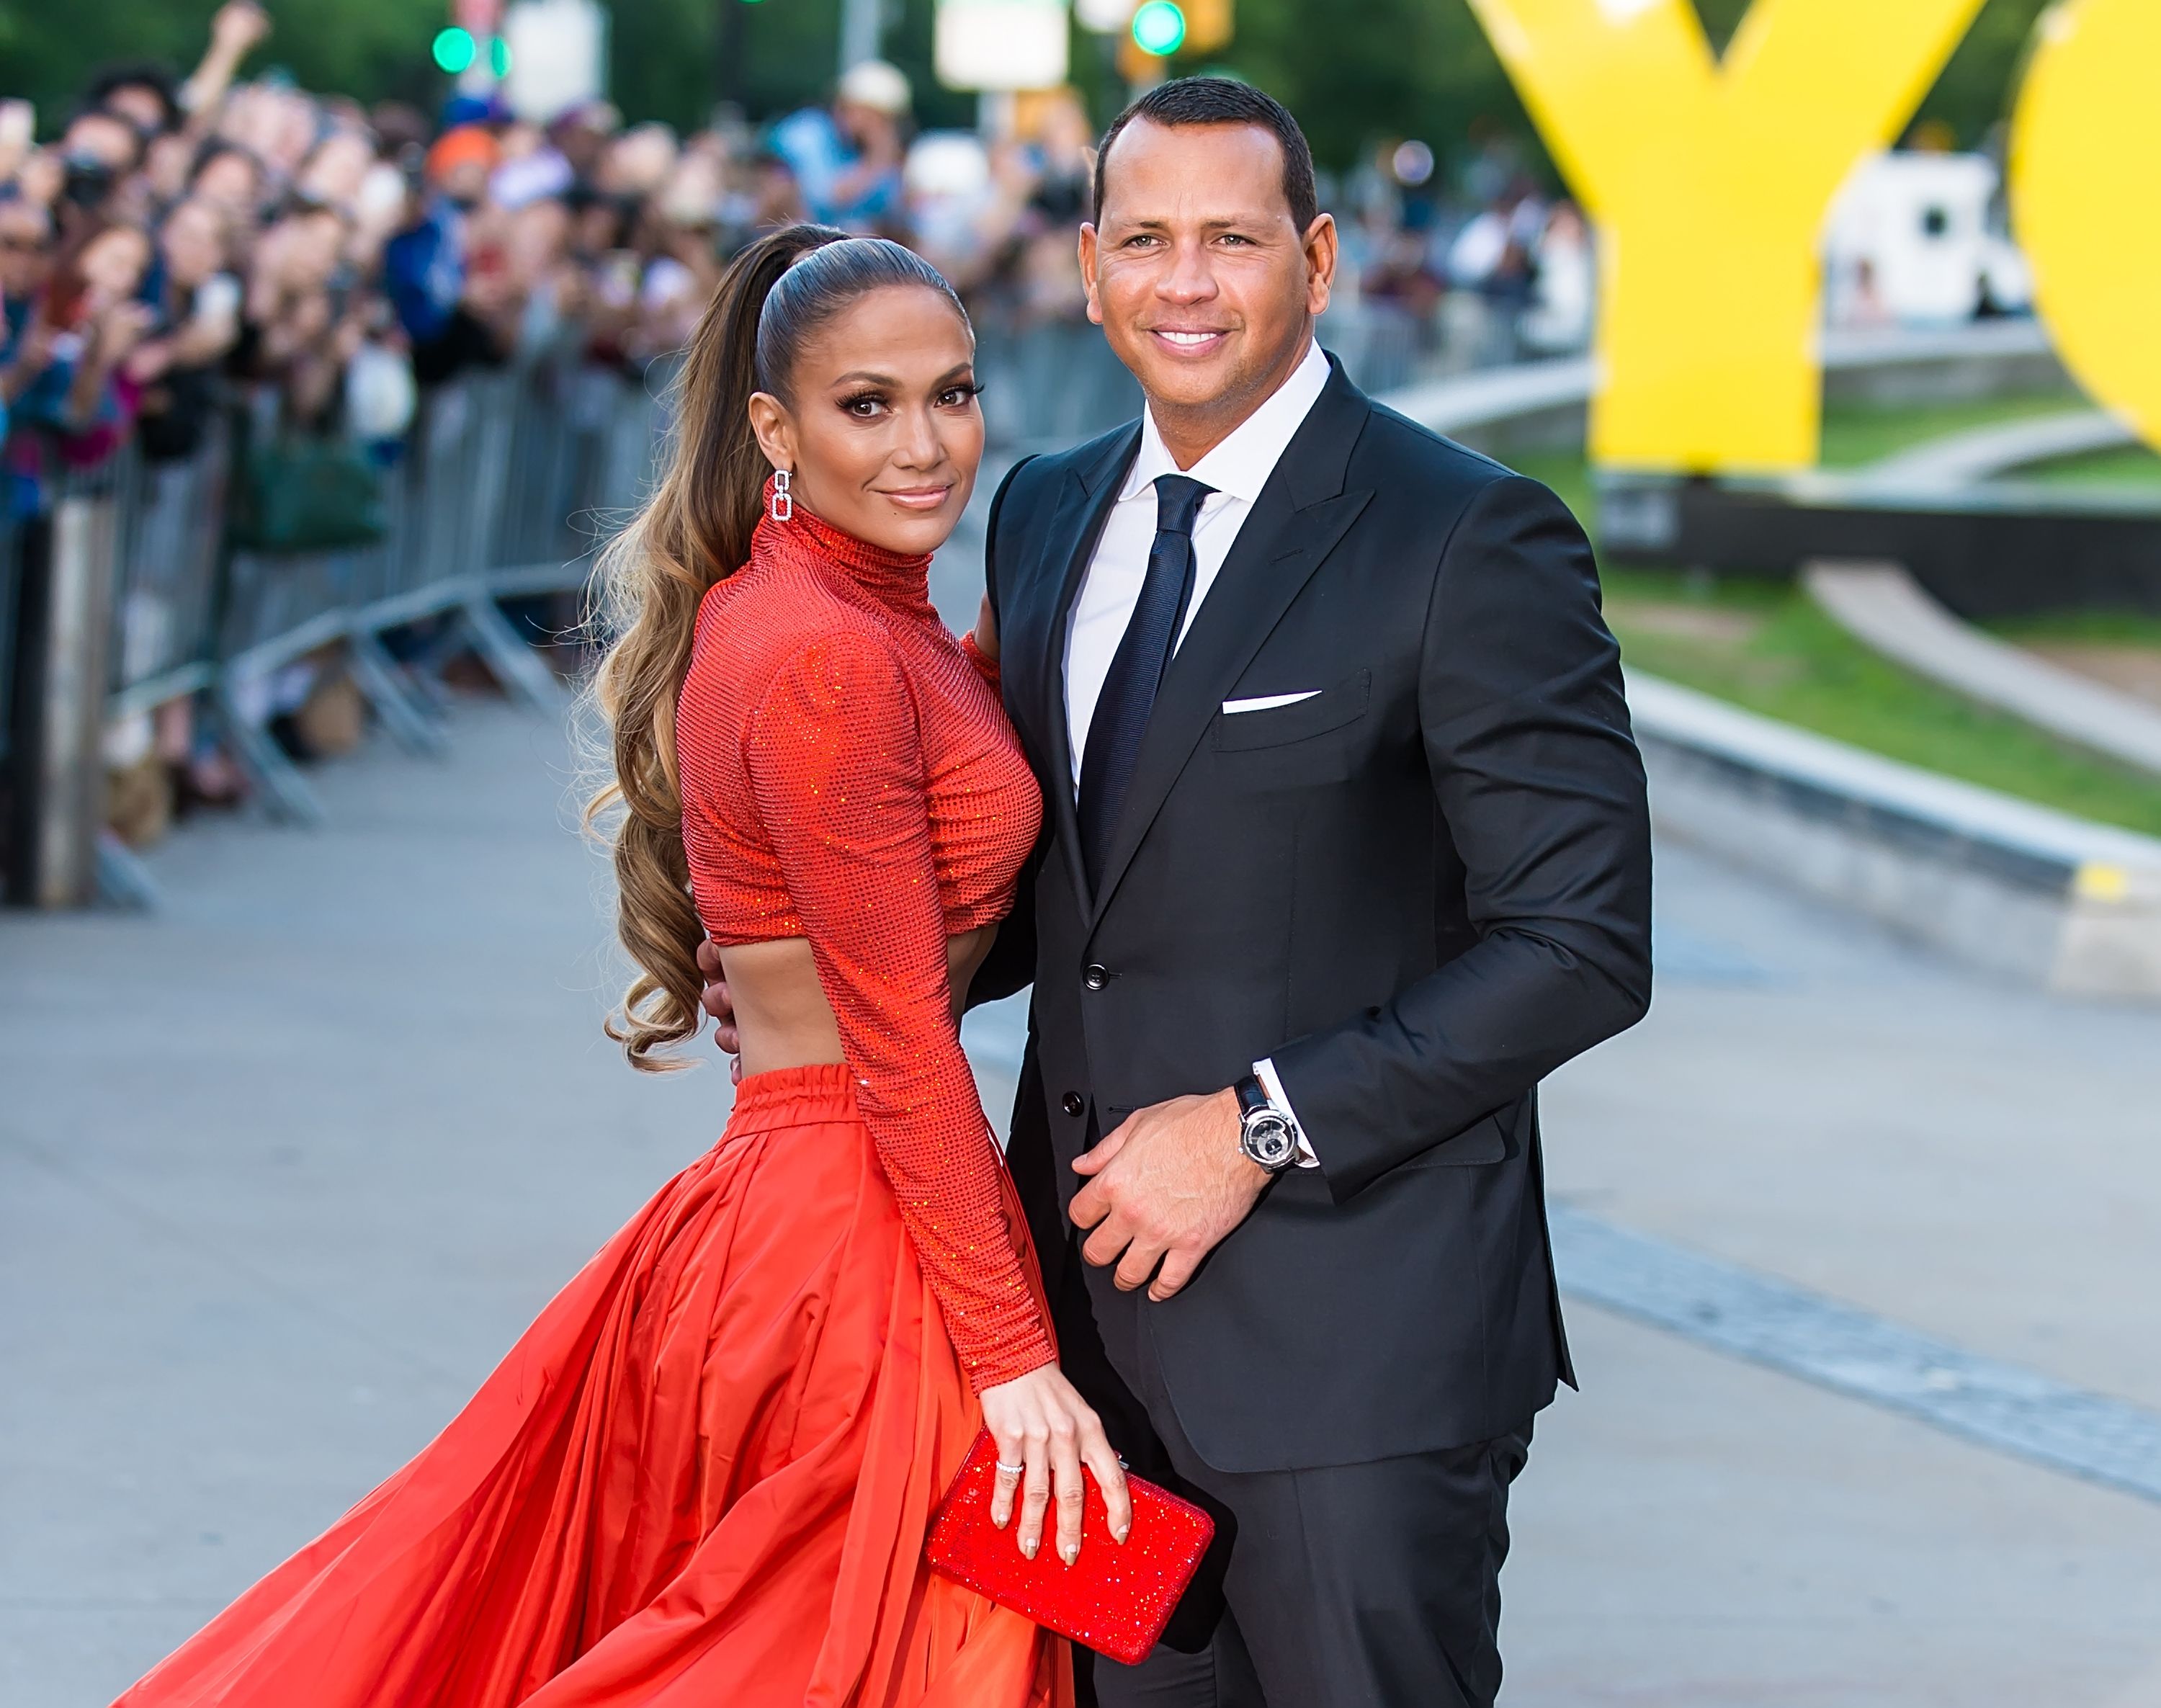 Jennifer Lopez and Alex Rodriguez at the 2019 CFDA Fashion Awards in New York City | Source: Getty Image